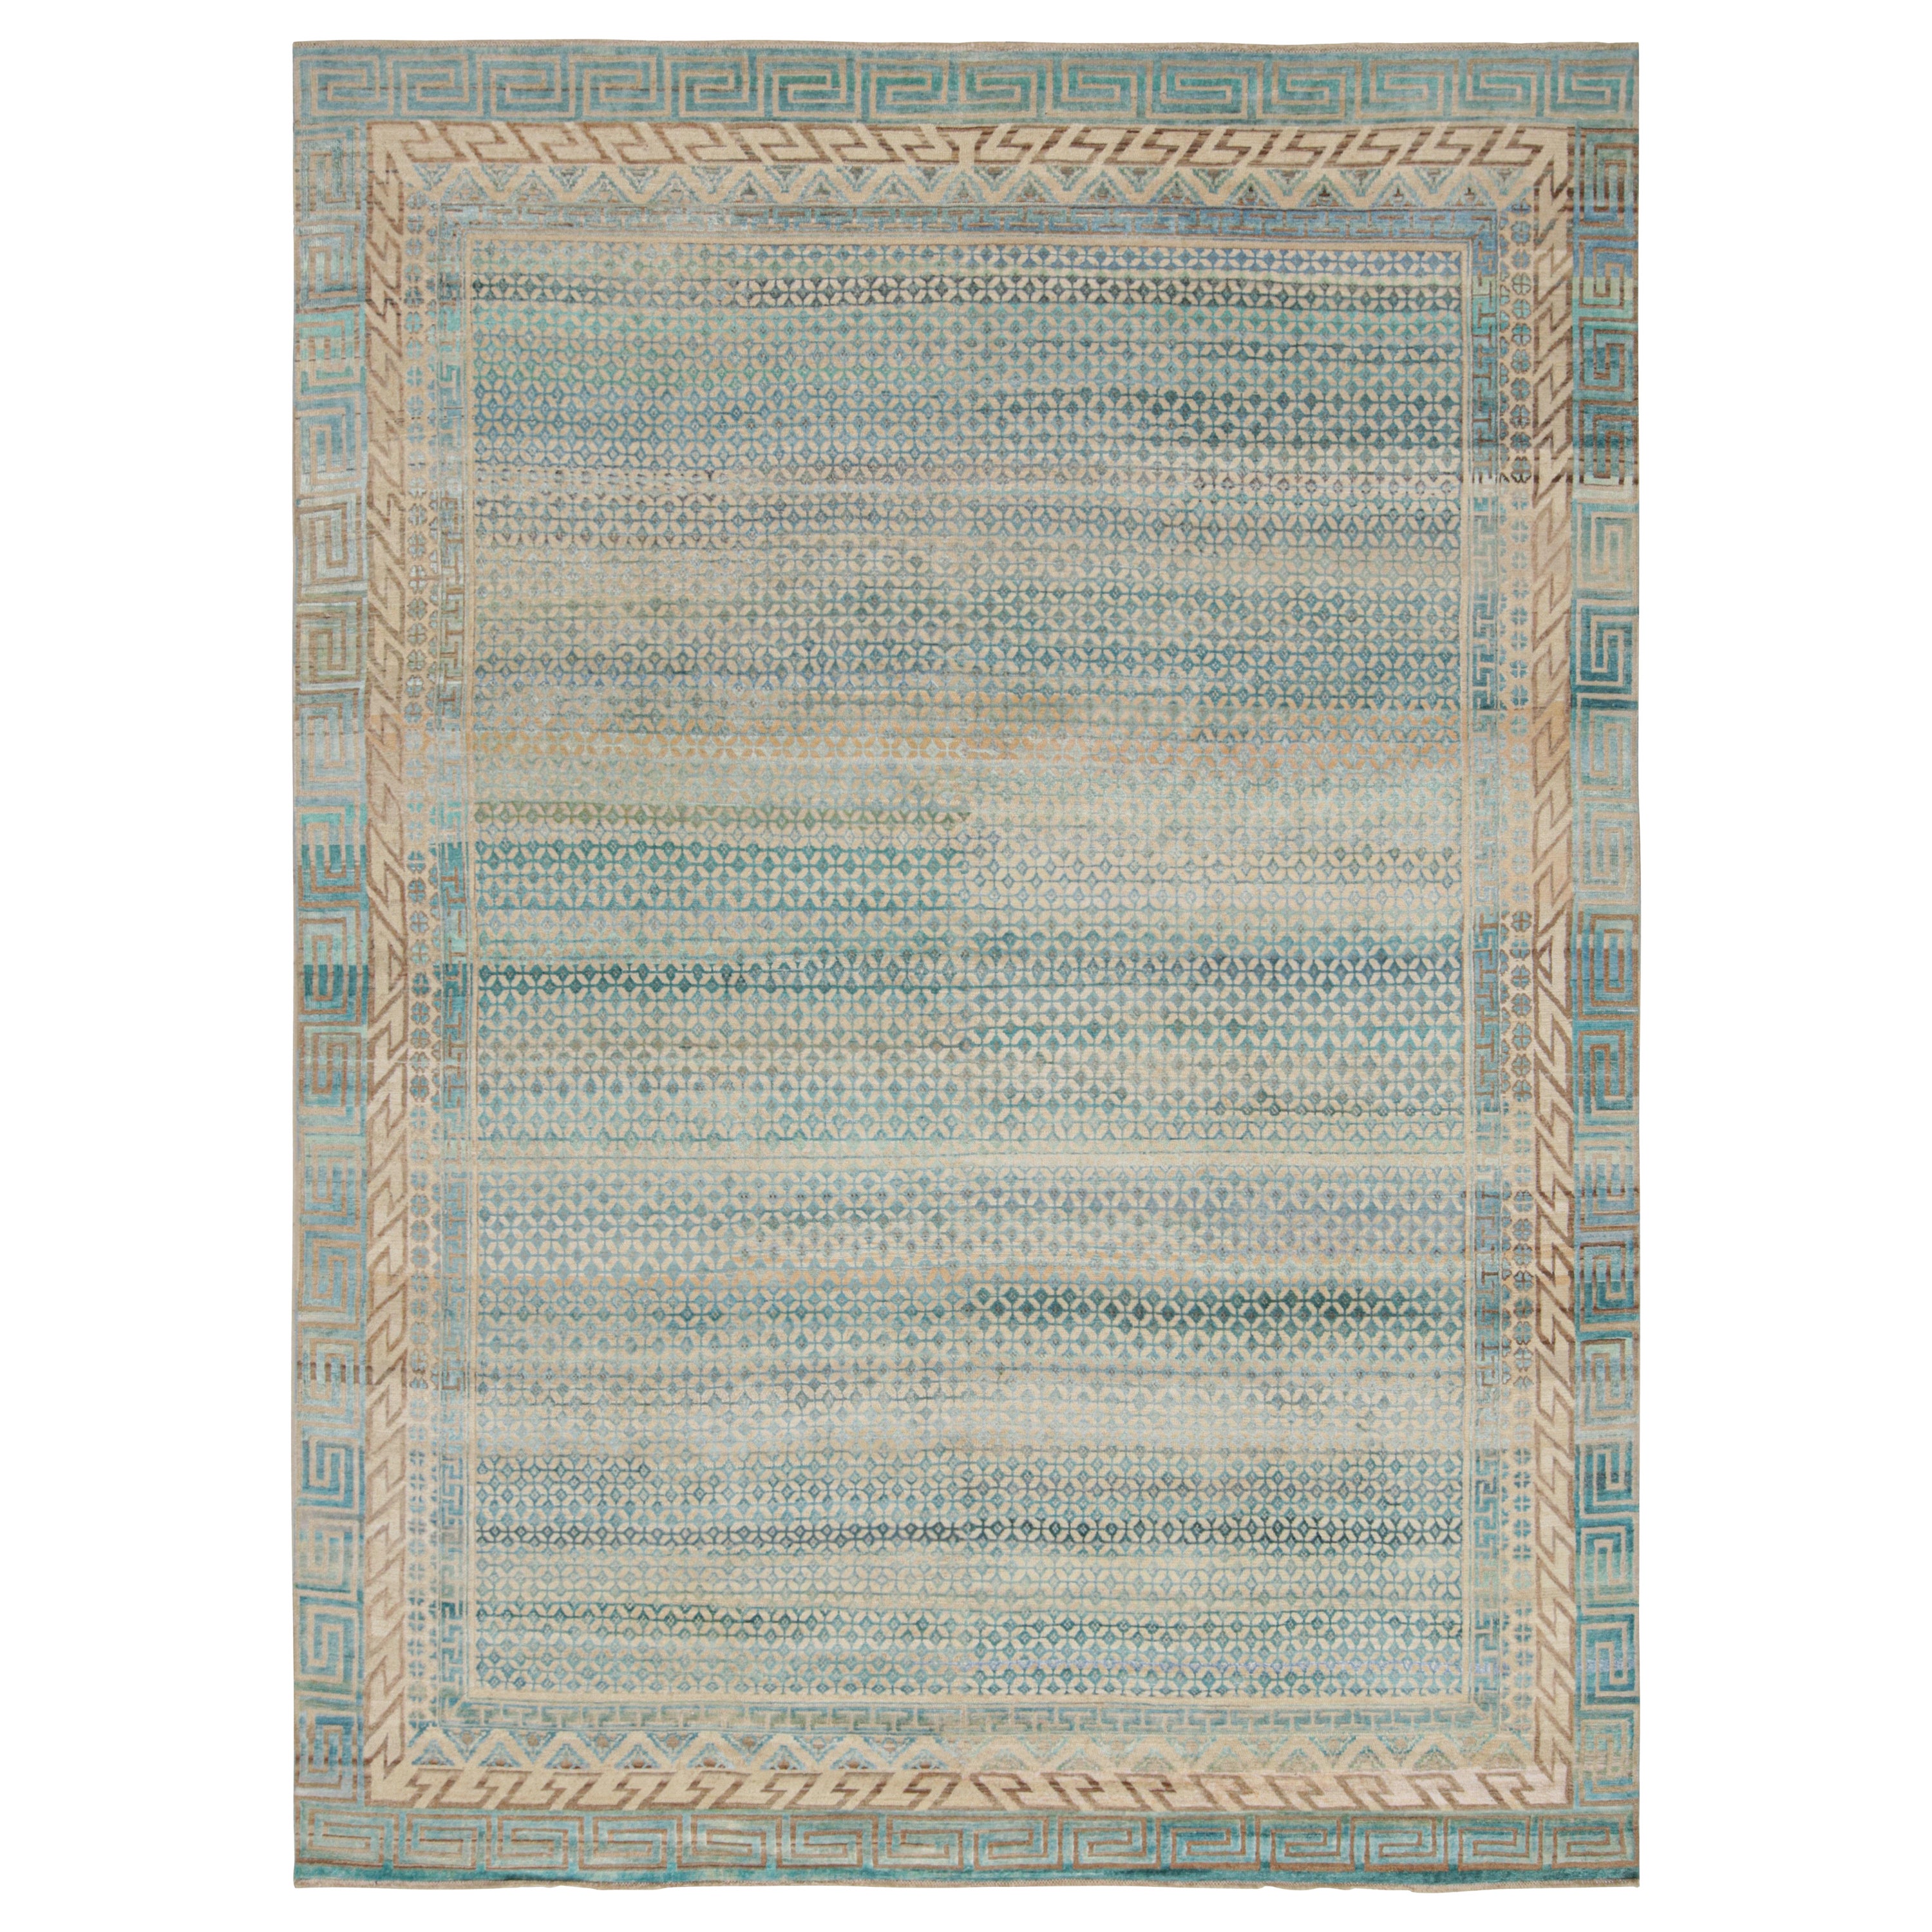 Rug & Kilim’s Contemporary Rug with Beige and Blue Geometric Patterns